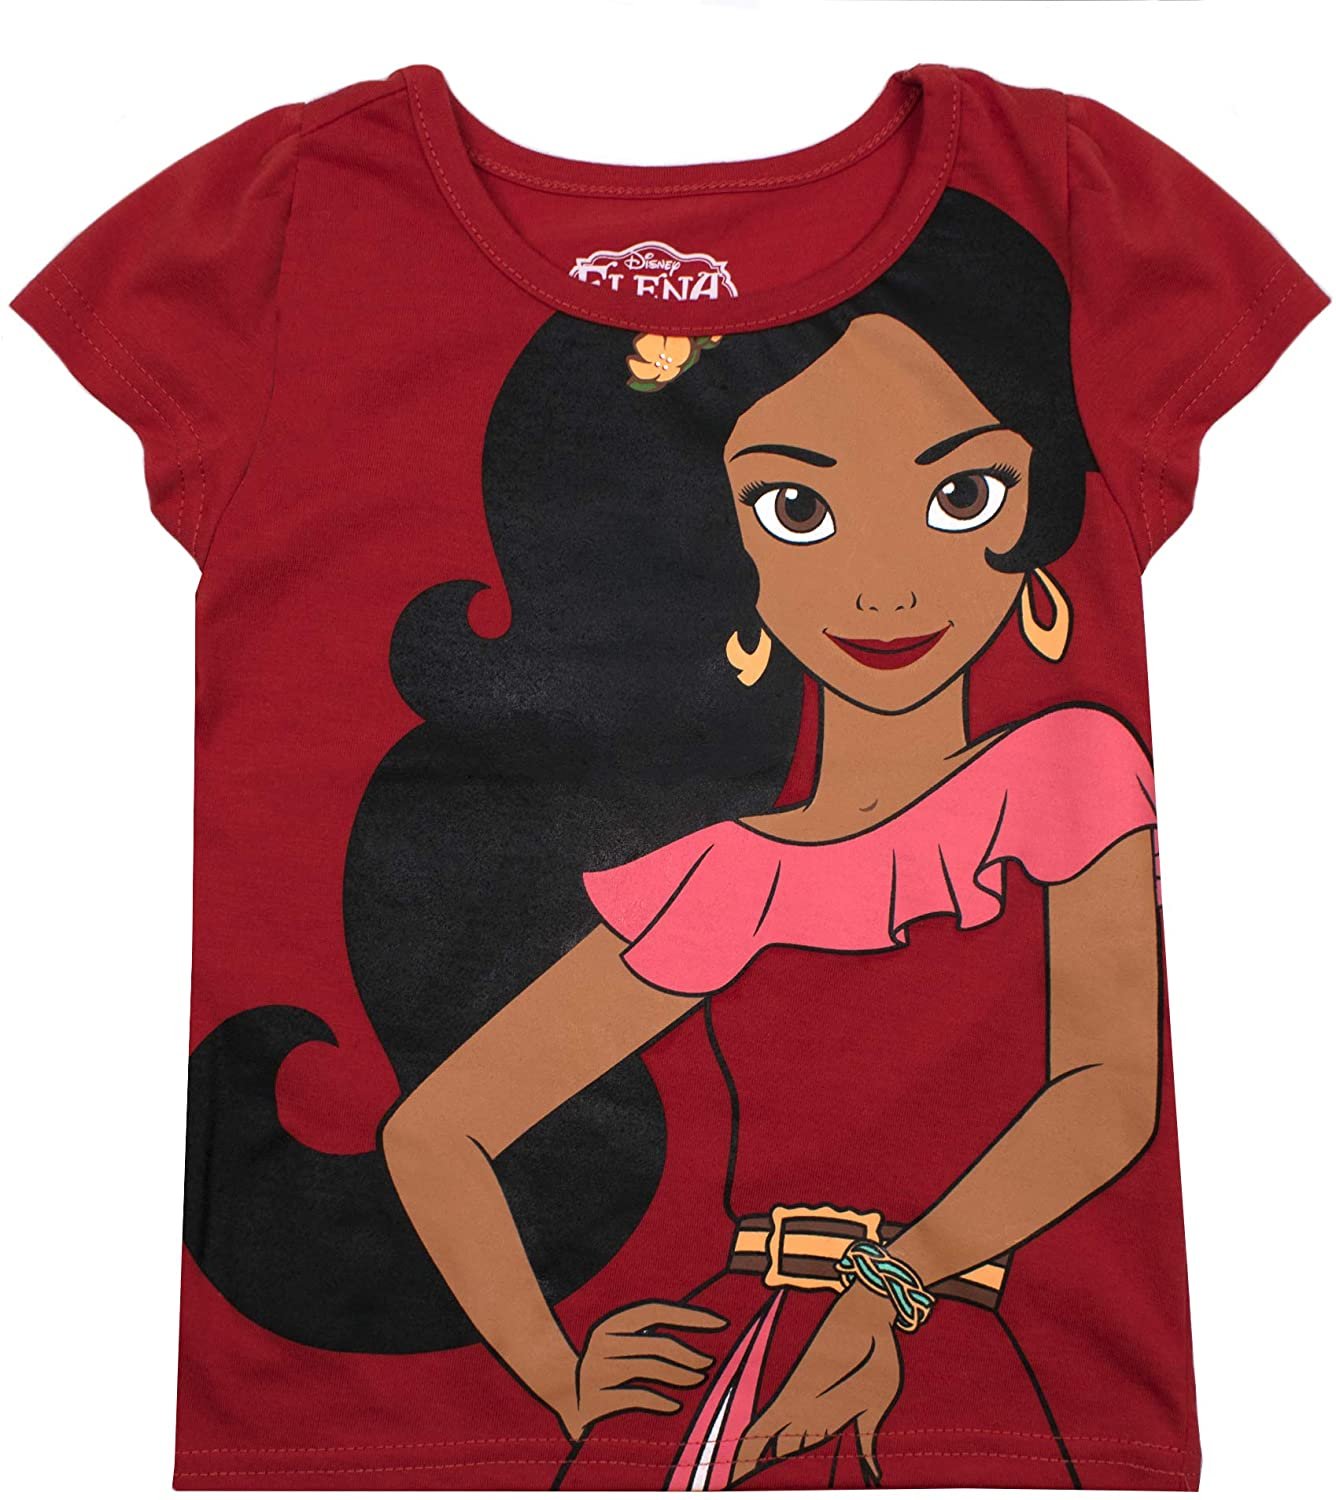 Disney Girls 3-Pack Short Sleeve T-Shirts, Casual Clothing for Toddlers and Kids - Elena of Avalor - image 2 of 4